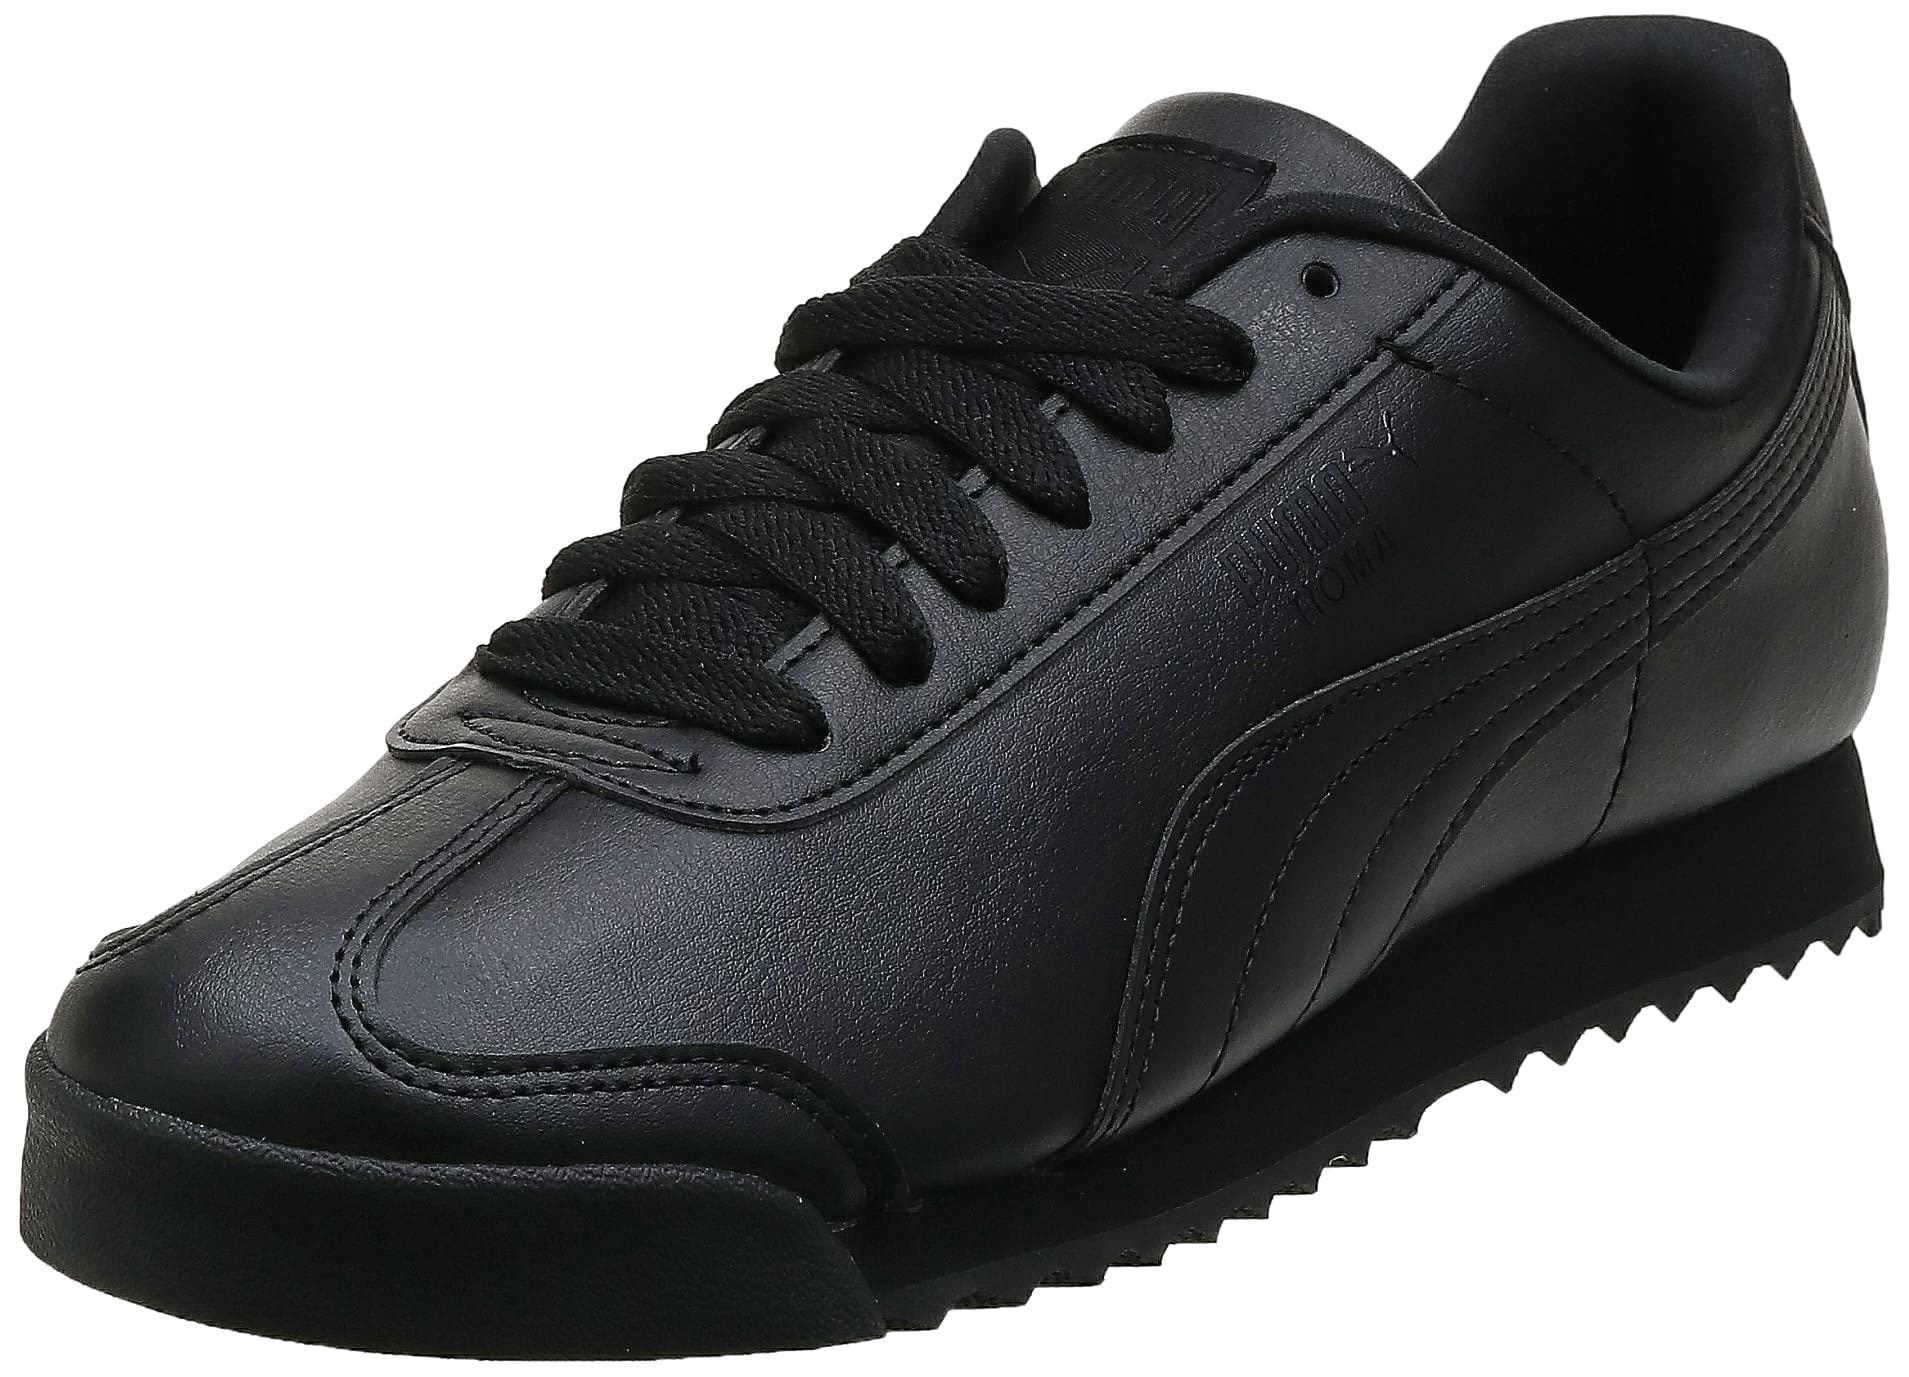 PUMA Synthetic Roma Basic in Black/Black (Black) for Men - Save 40% - Lyst